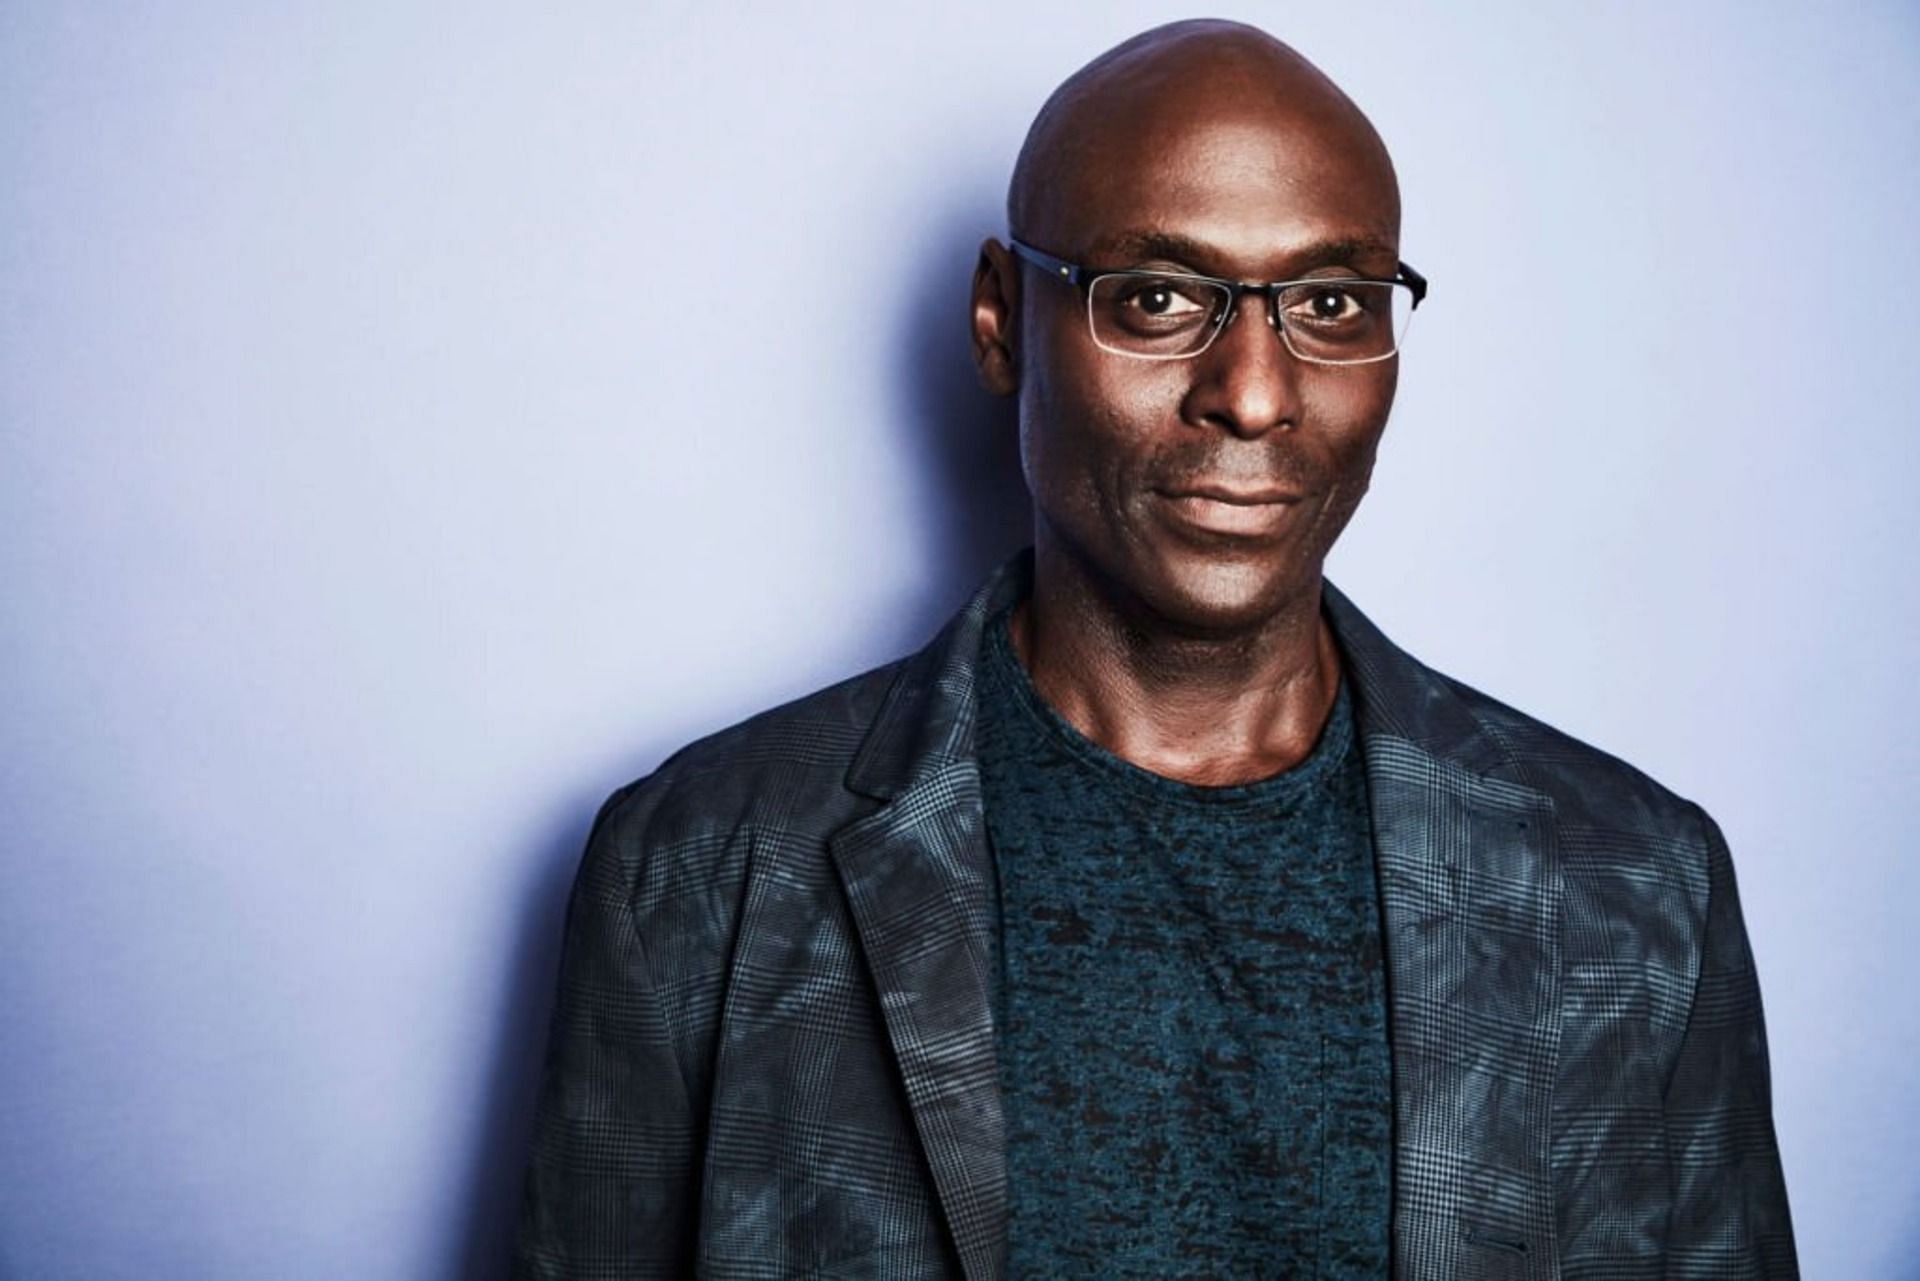 Lance Reddick played the role of Charon in the John Wick franchise (Image via Maarten de Boer/Getty Images)